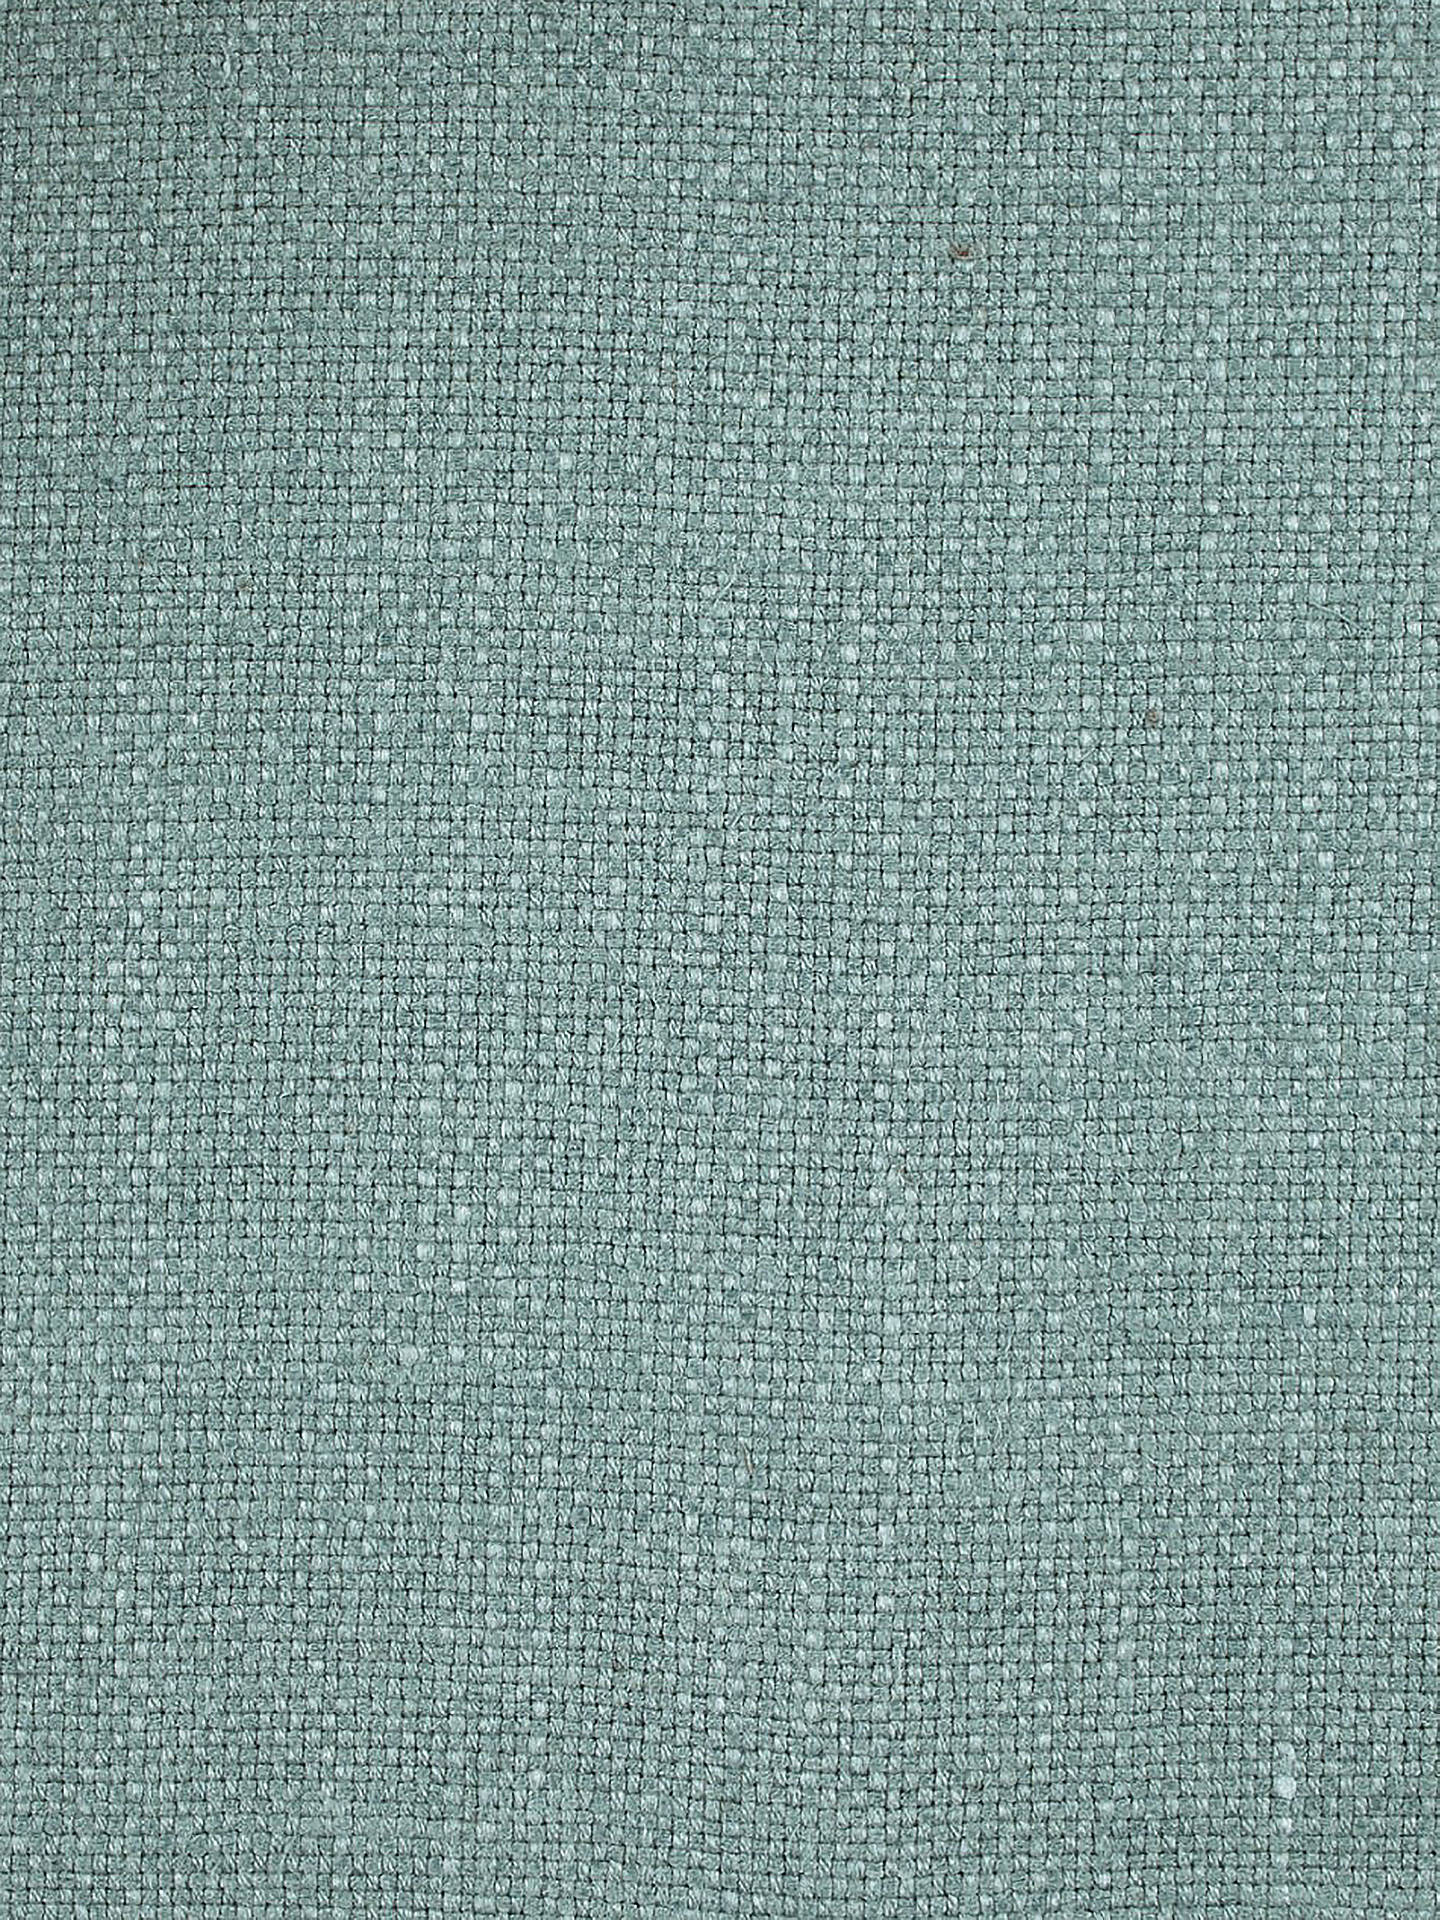 Sanderson Tuscany II Made to Measure Curtains, Soft Teal